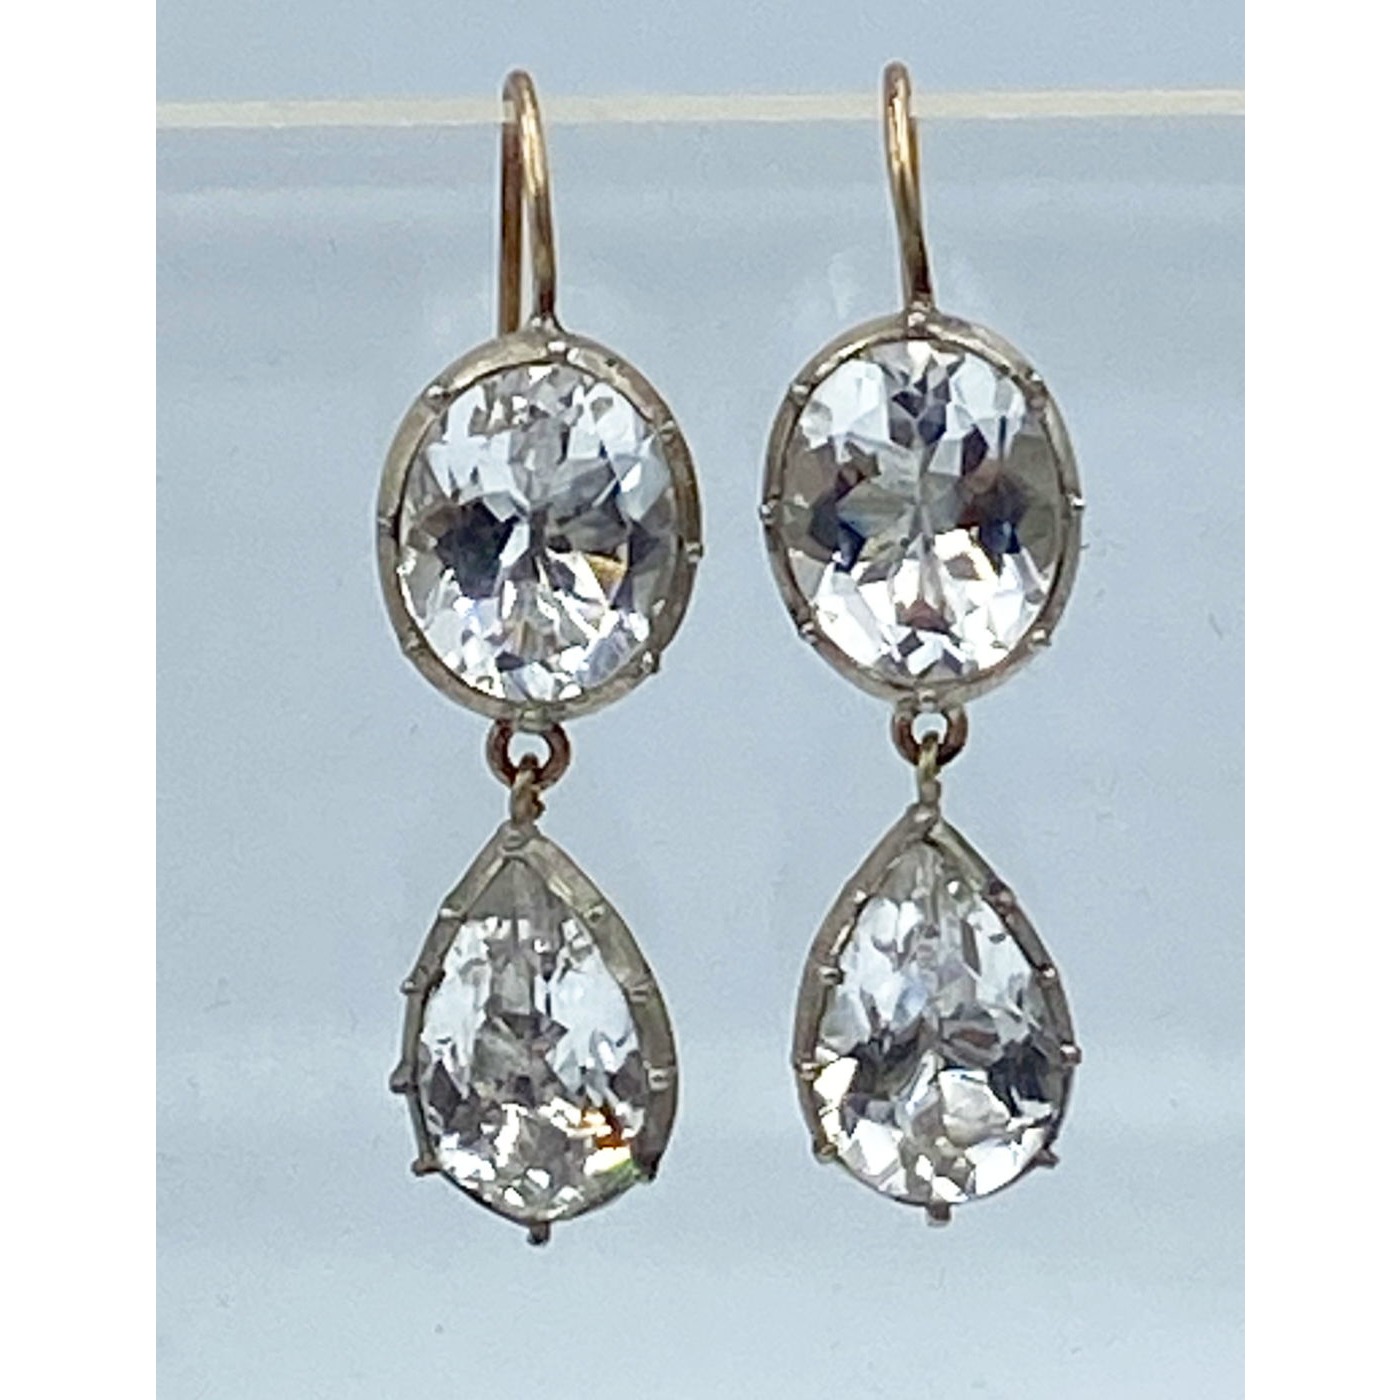 Stunning Spectacular Double Pendant Early 1800's Rock Crystal Earrings - Special